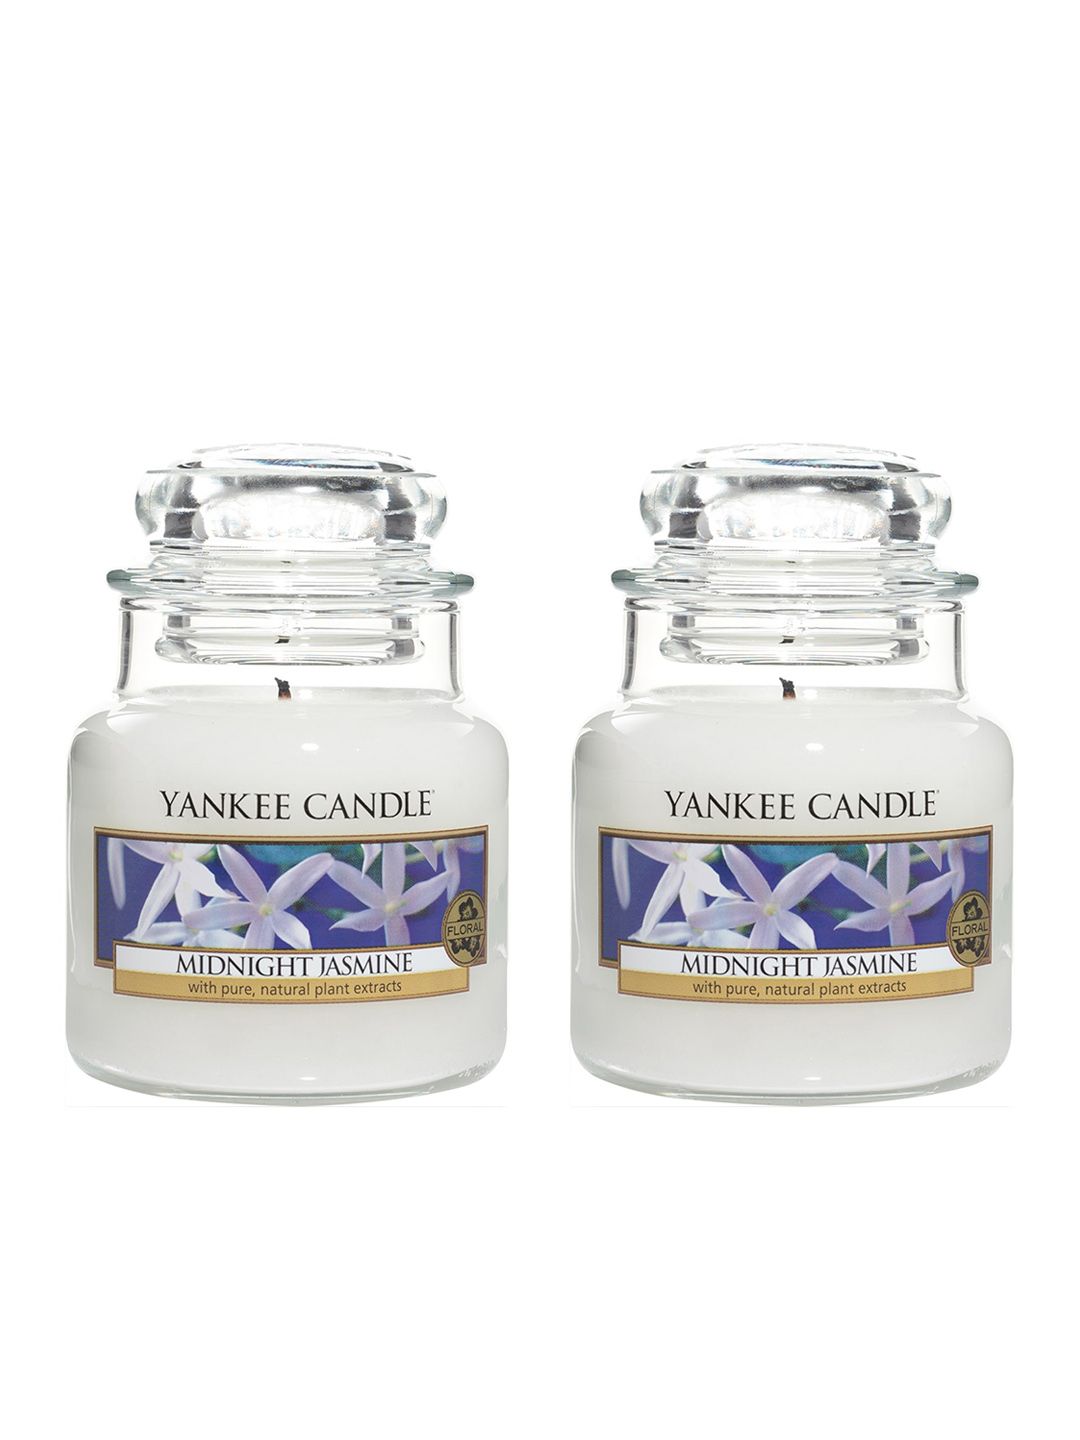 YANKEE CANDLE Set content: Set of 2 Scented Jar Candles Price in India